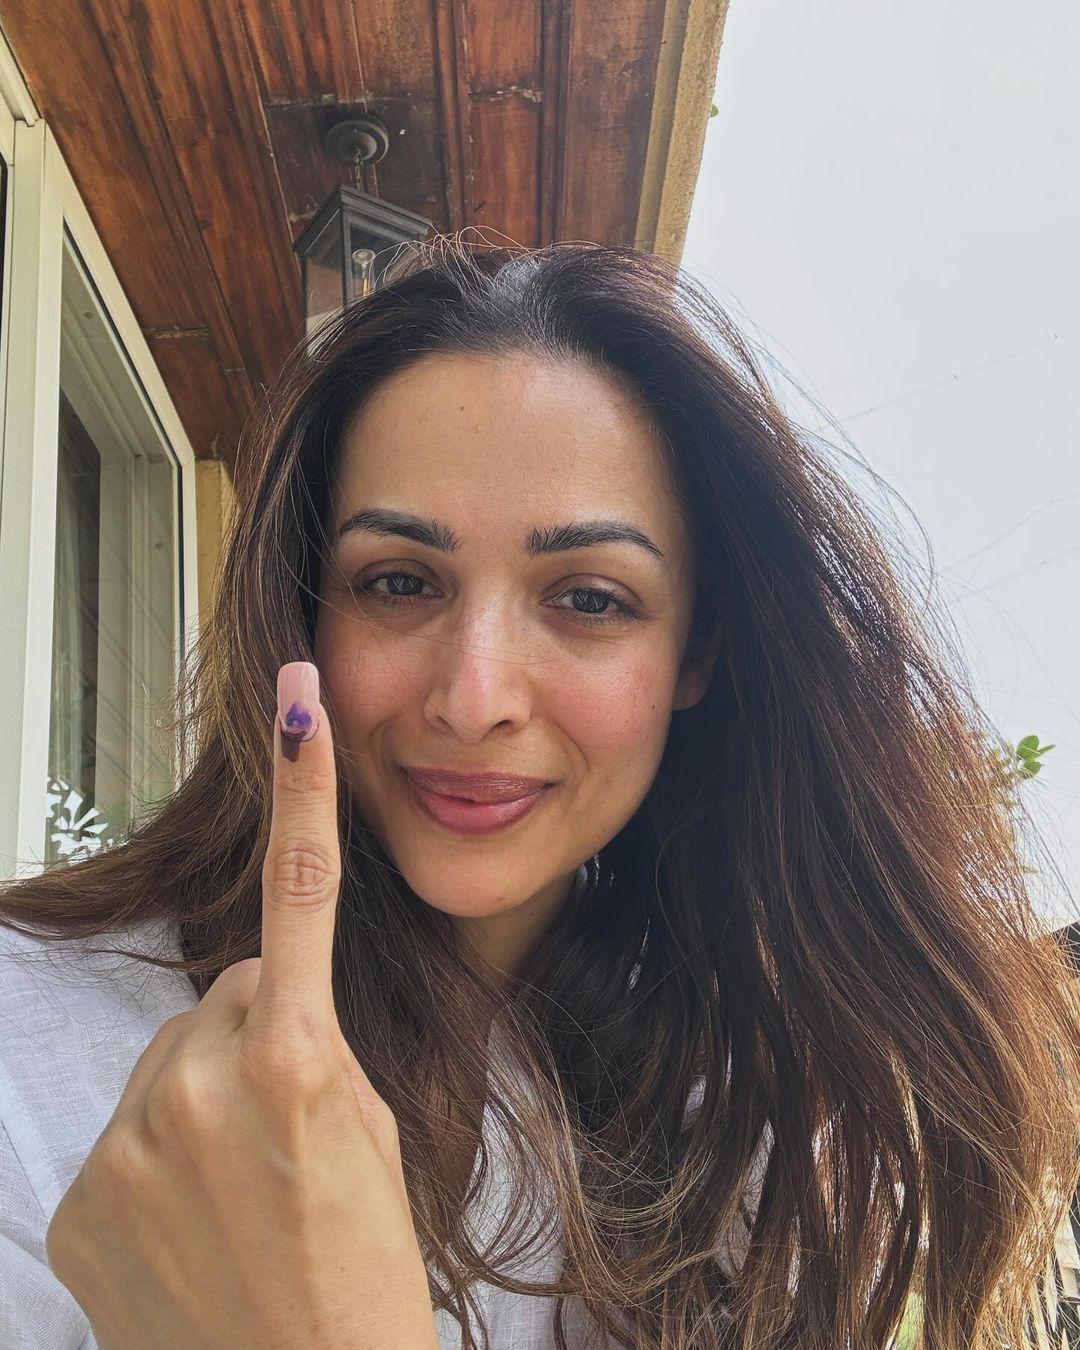 Malaika Arora was all smile as she dropped a cute selfie flaunting her inked finger